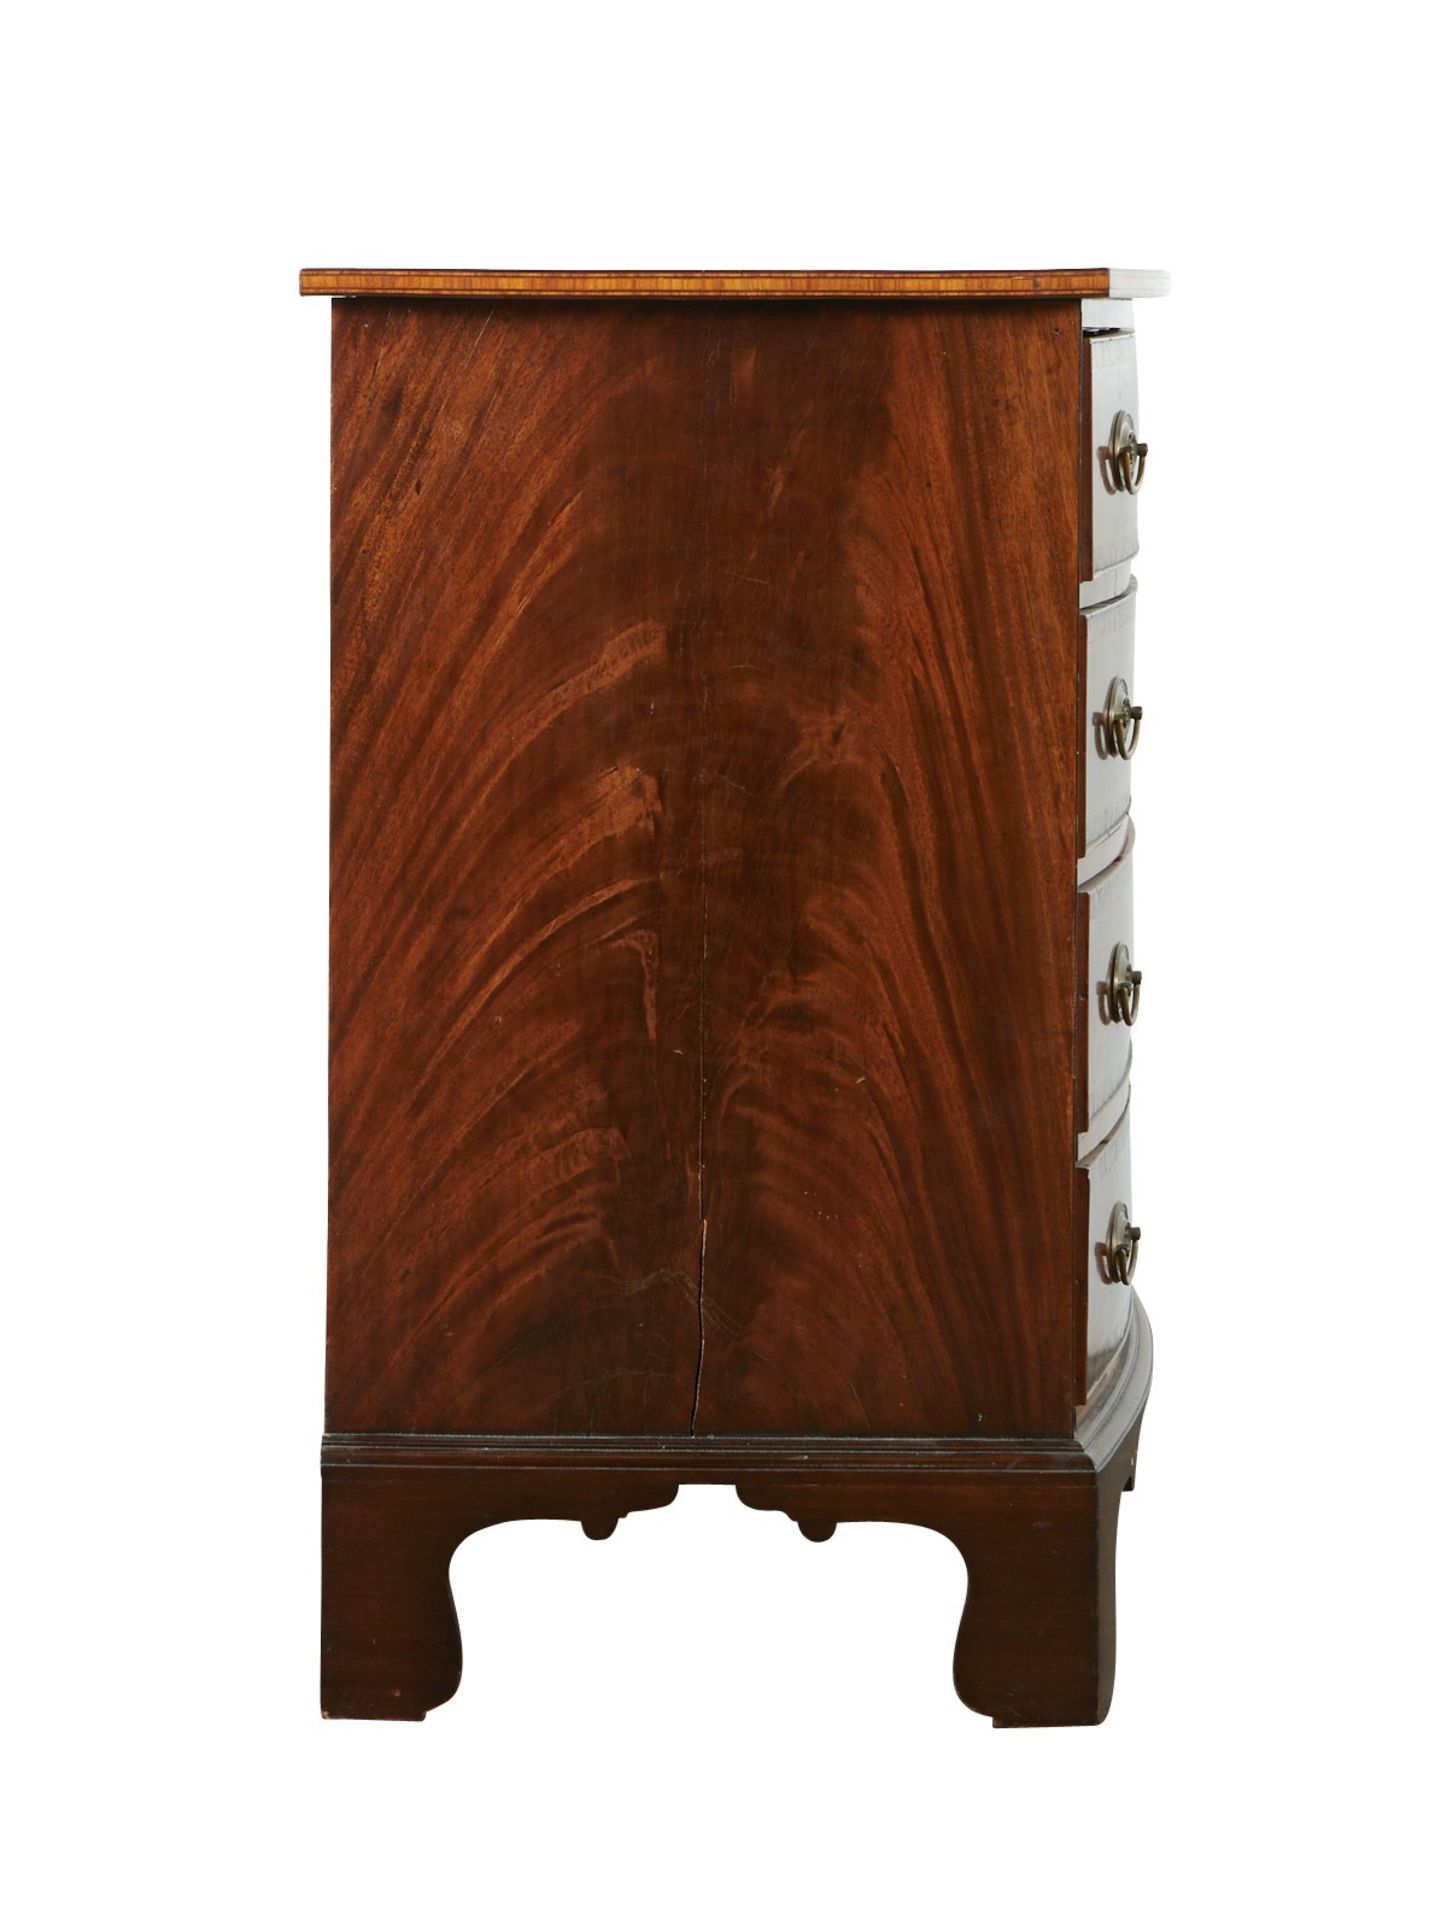 Federal Bow Front Chest of Drawers - Image 5 of 14